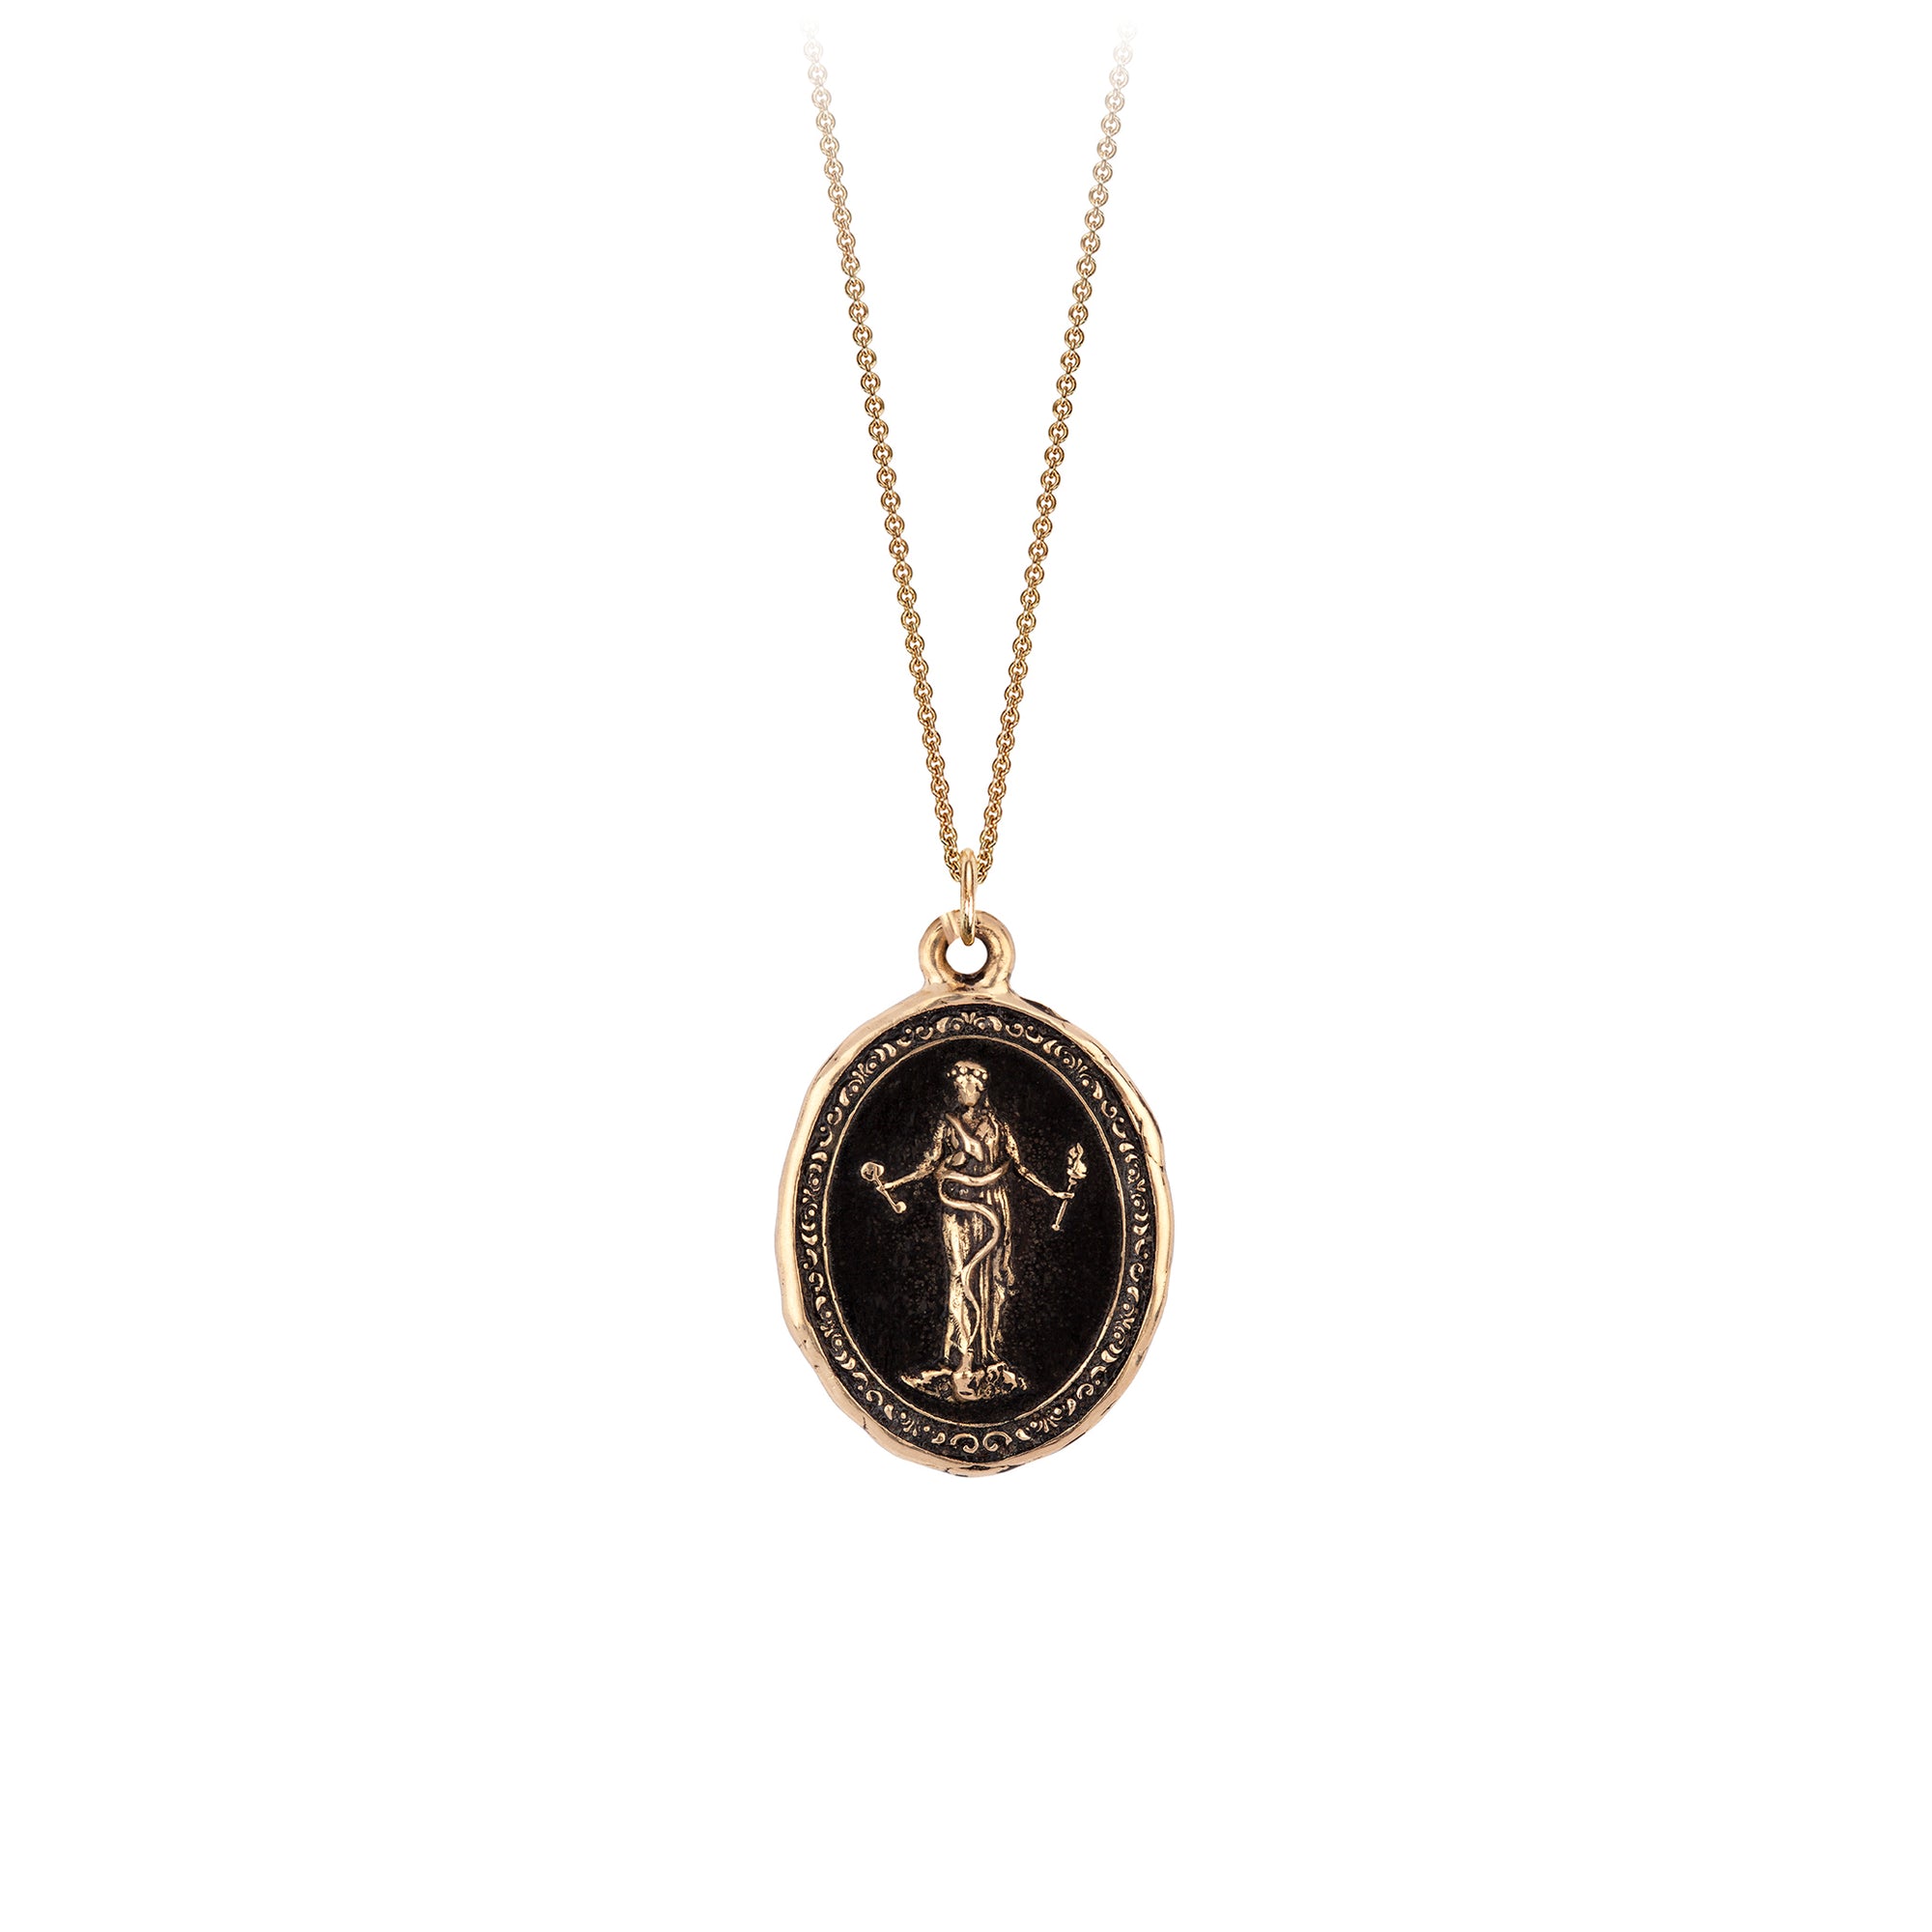 A 14k gold chain featuring our 14k gold Hecate goddess talisman.